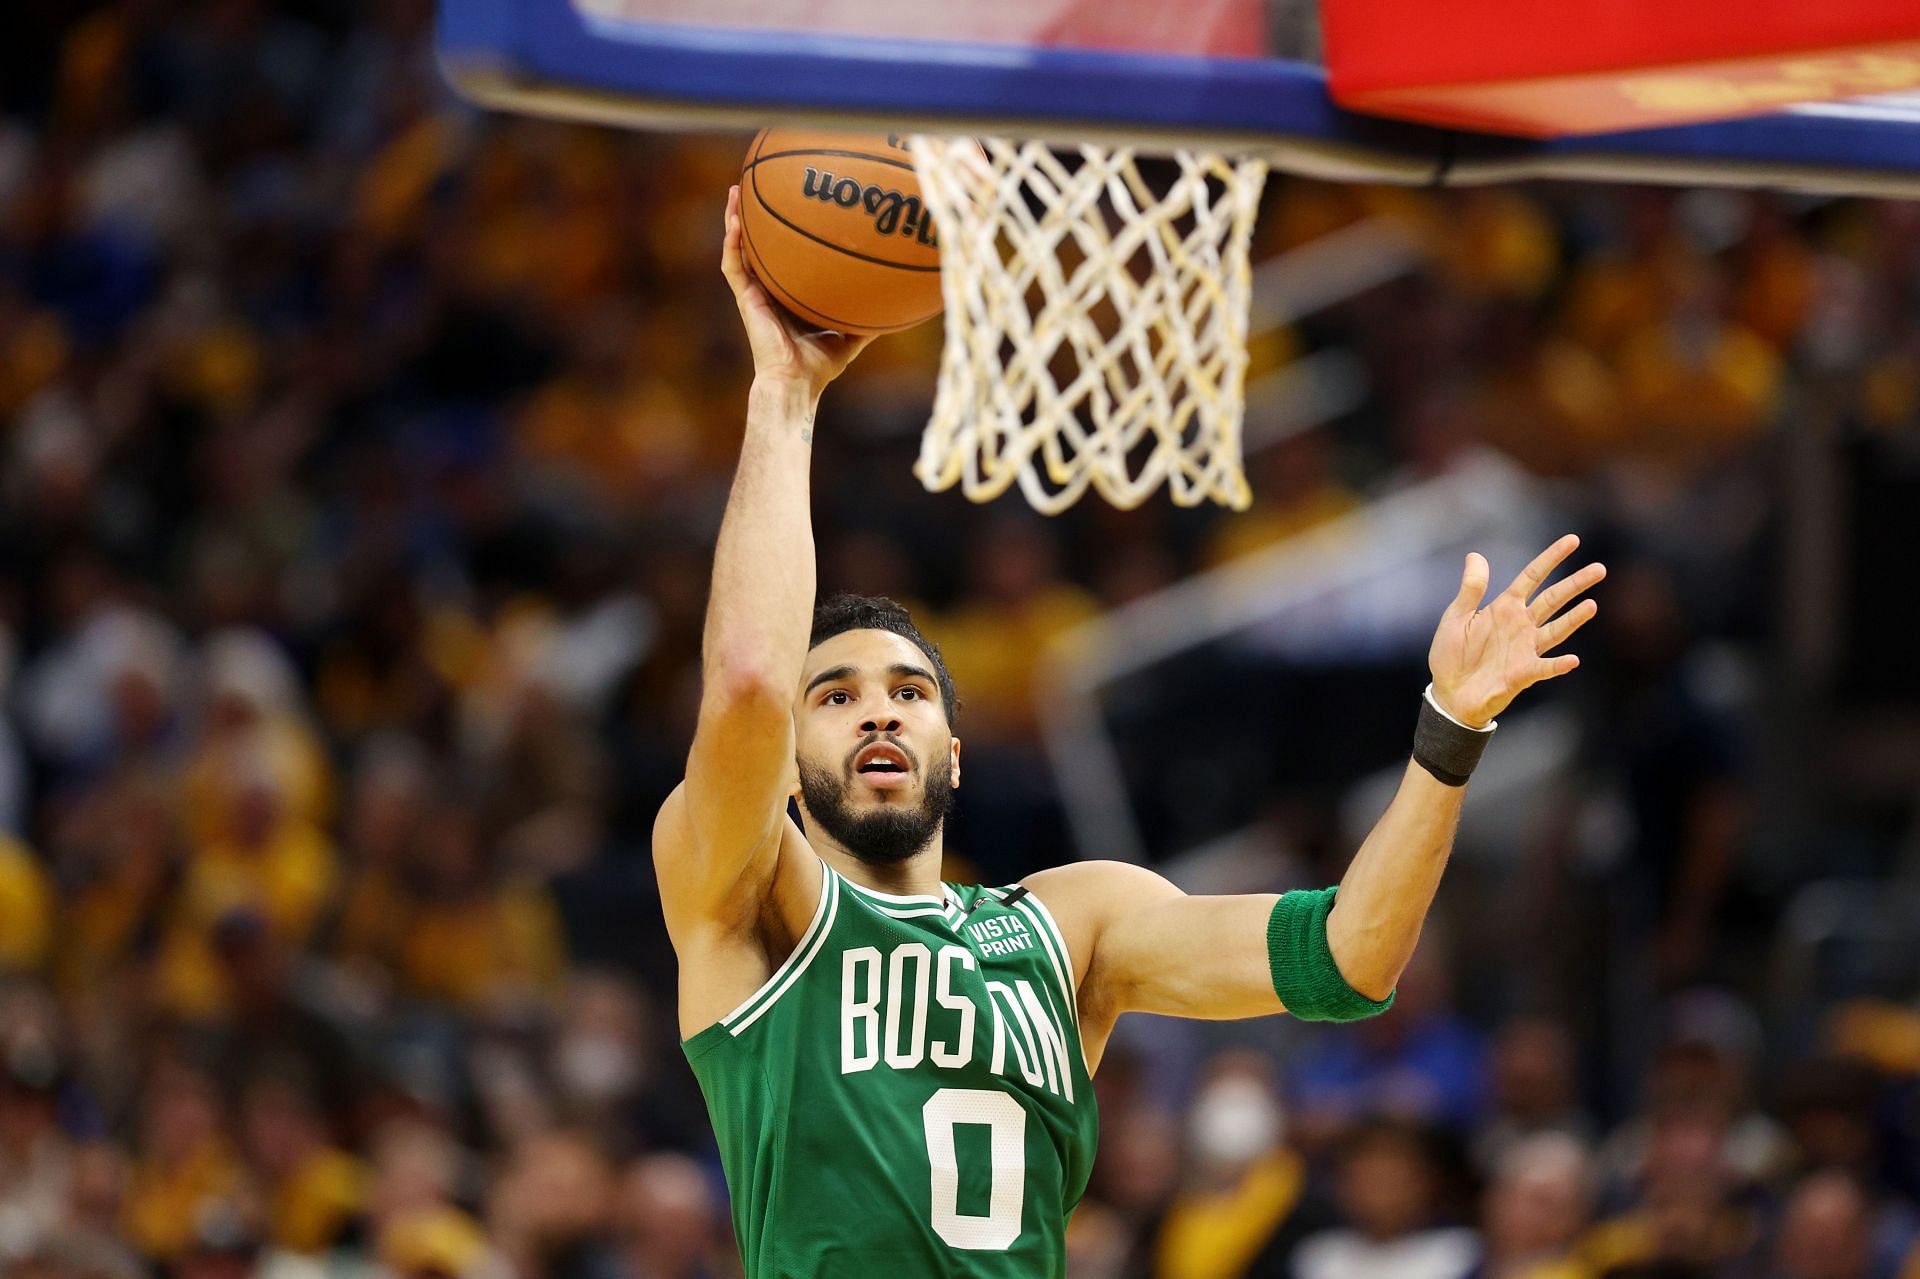 Jayson Tatum struggled with his shooting but had a double-double to his name in Game 1